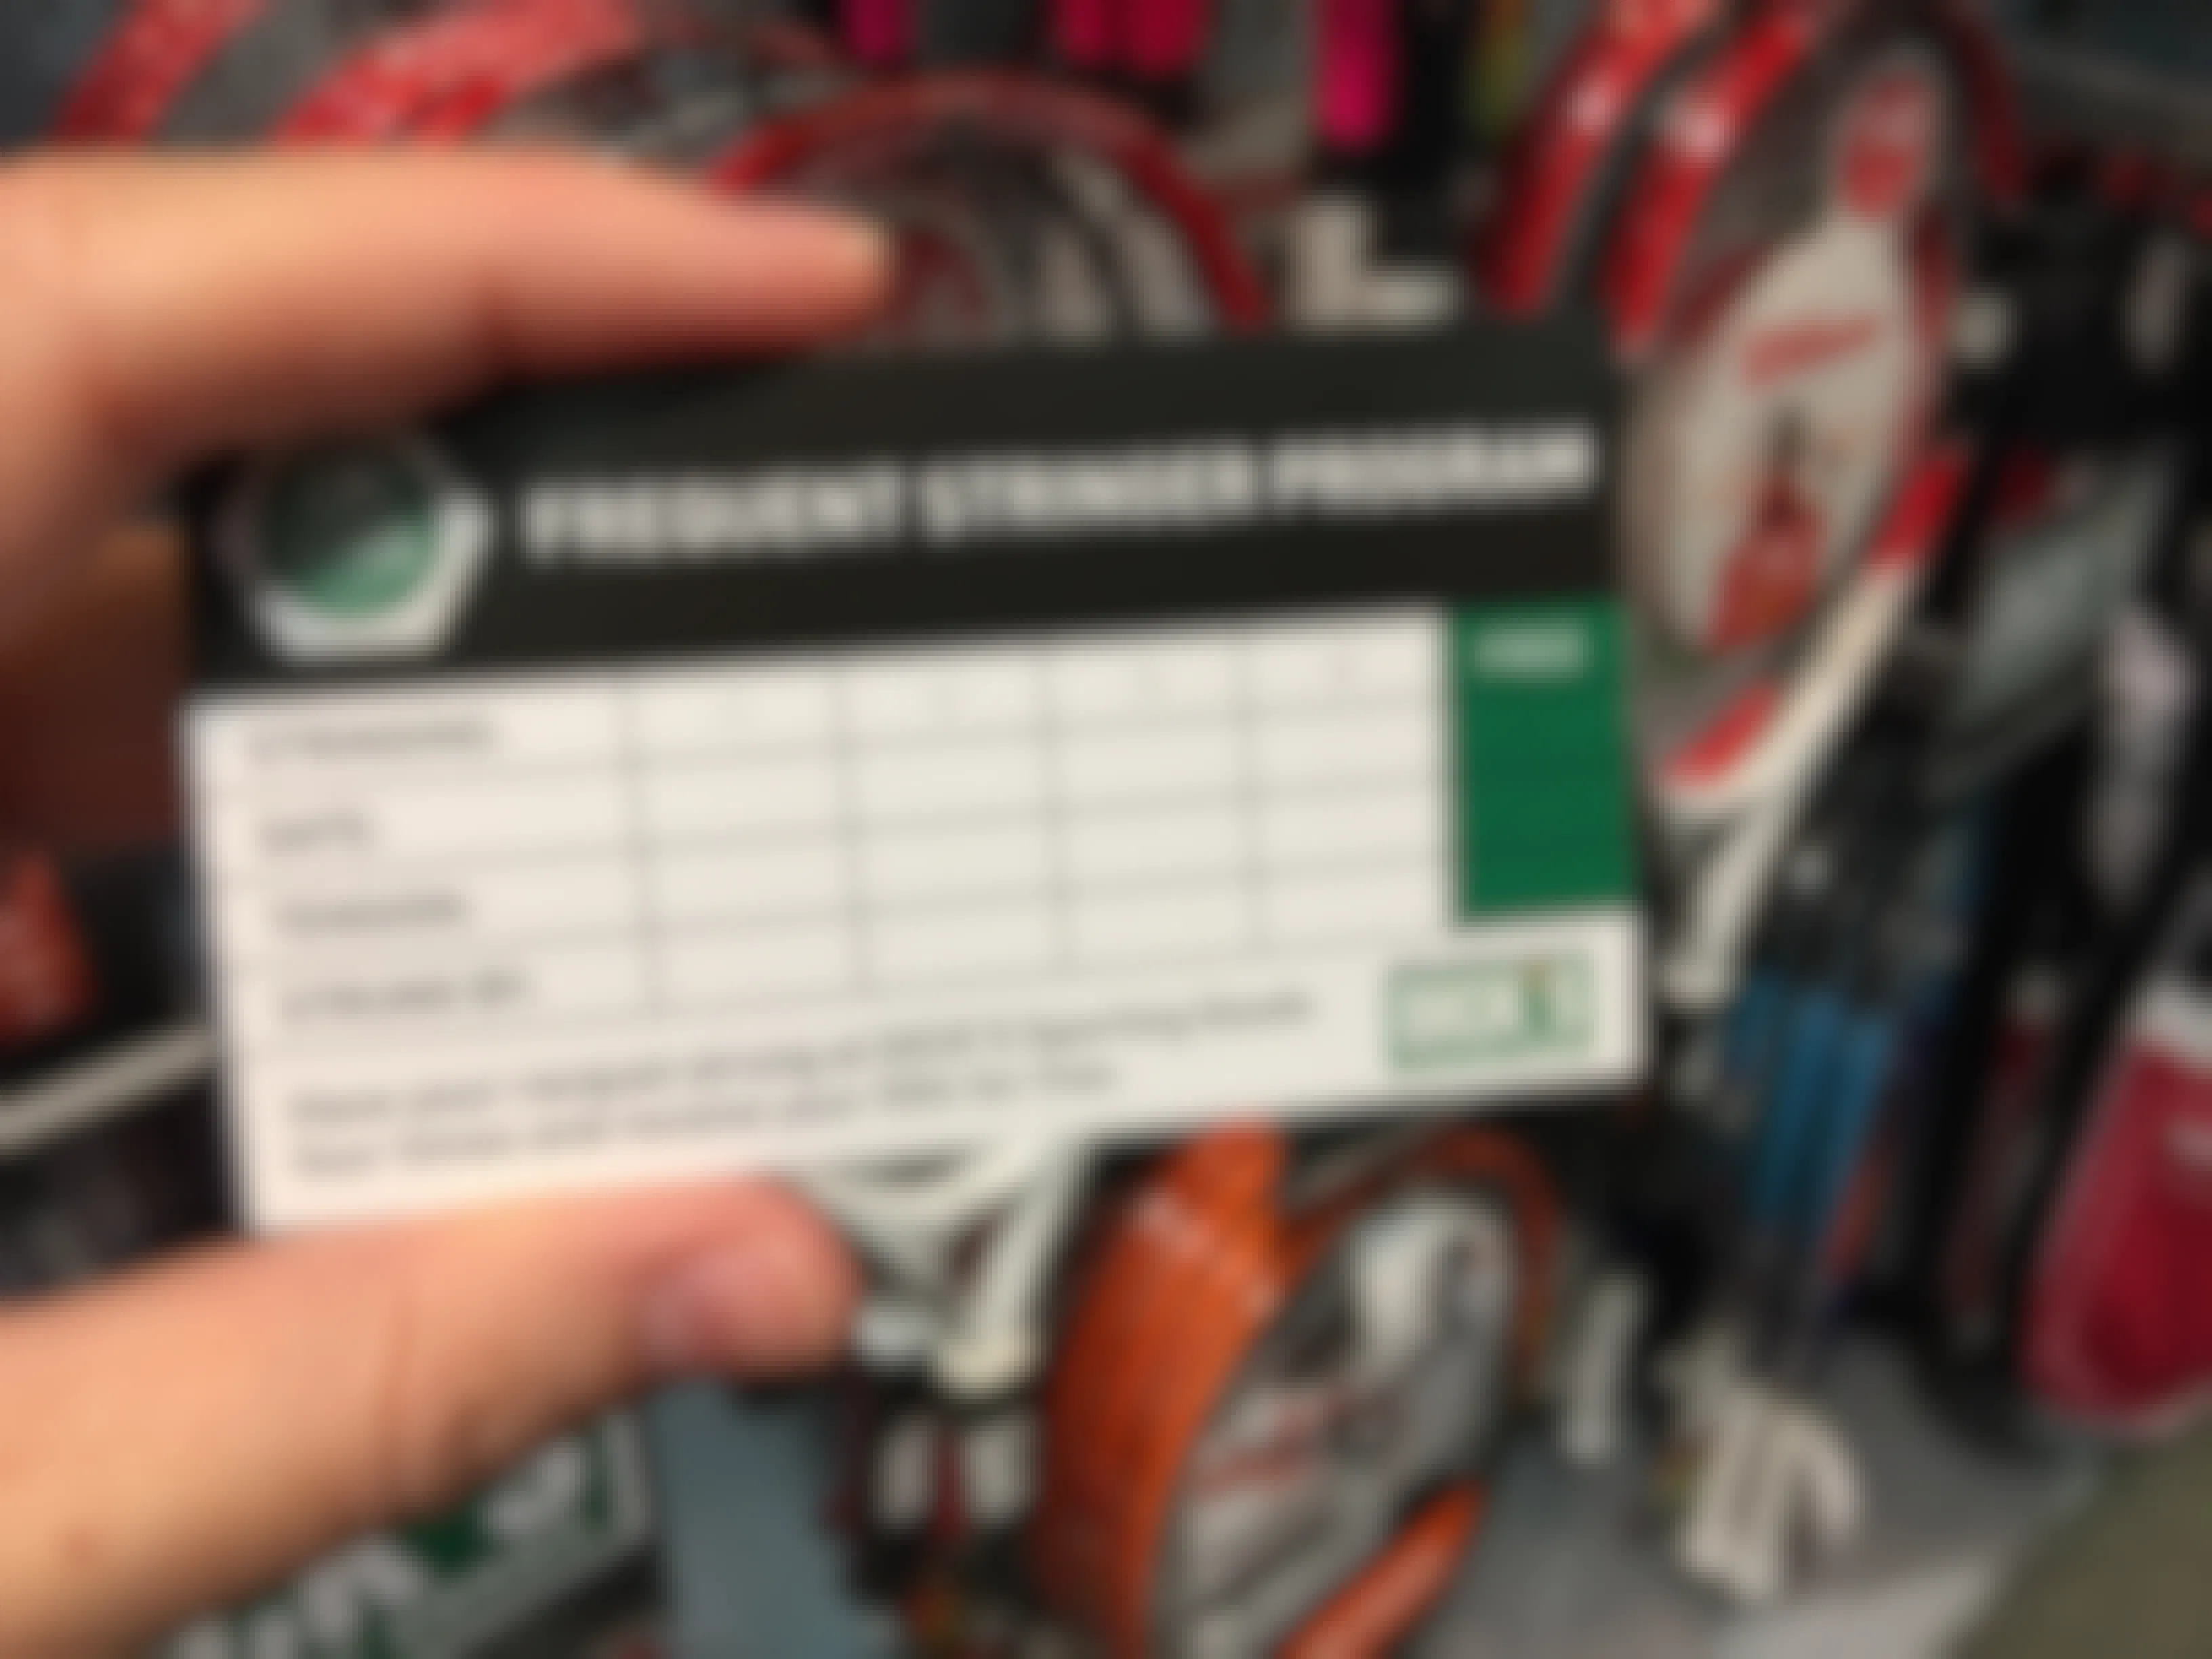 A person's hand holding up a Frequent Stringer Program card in front of a wall of rackets inside Dick's Sporting Goods.